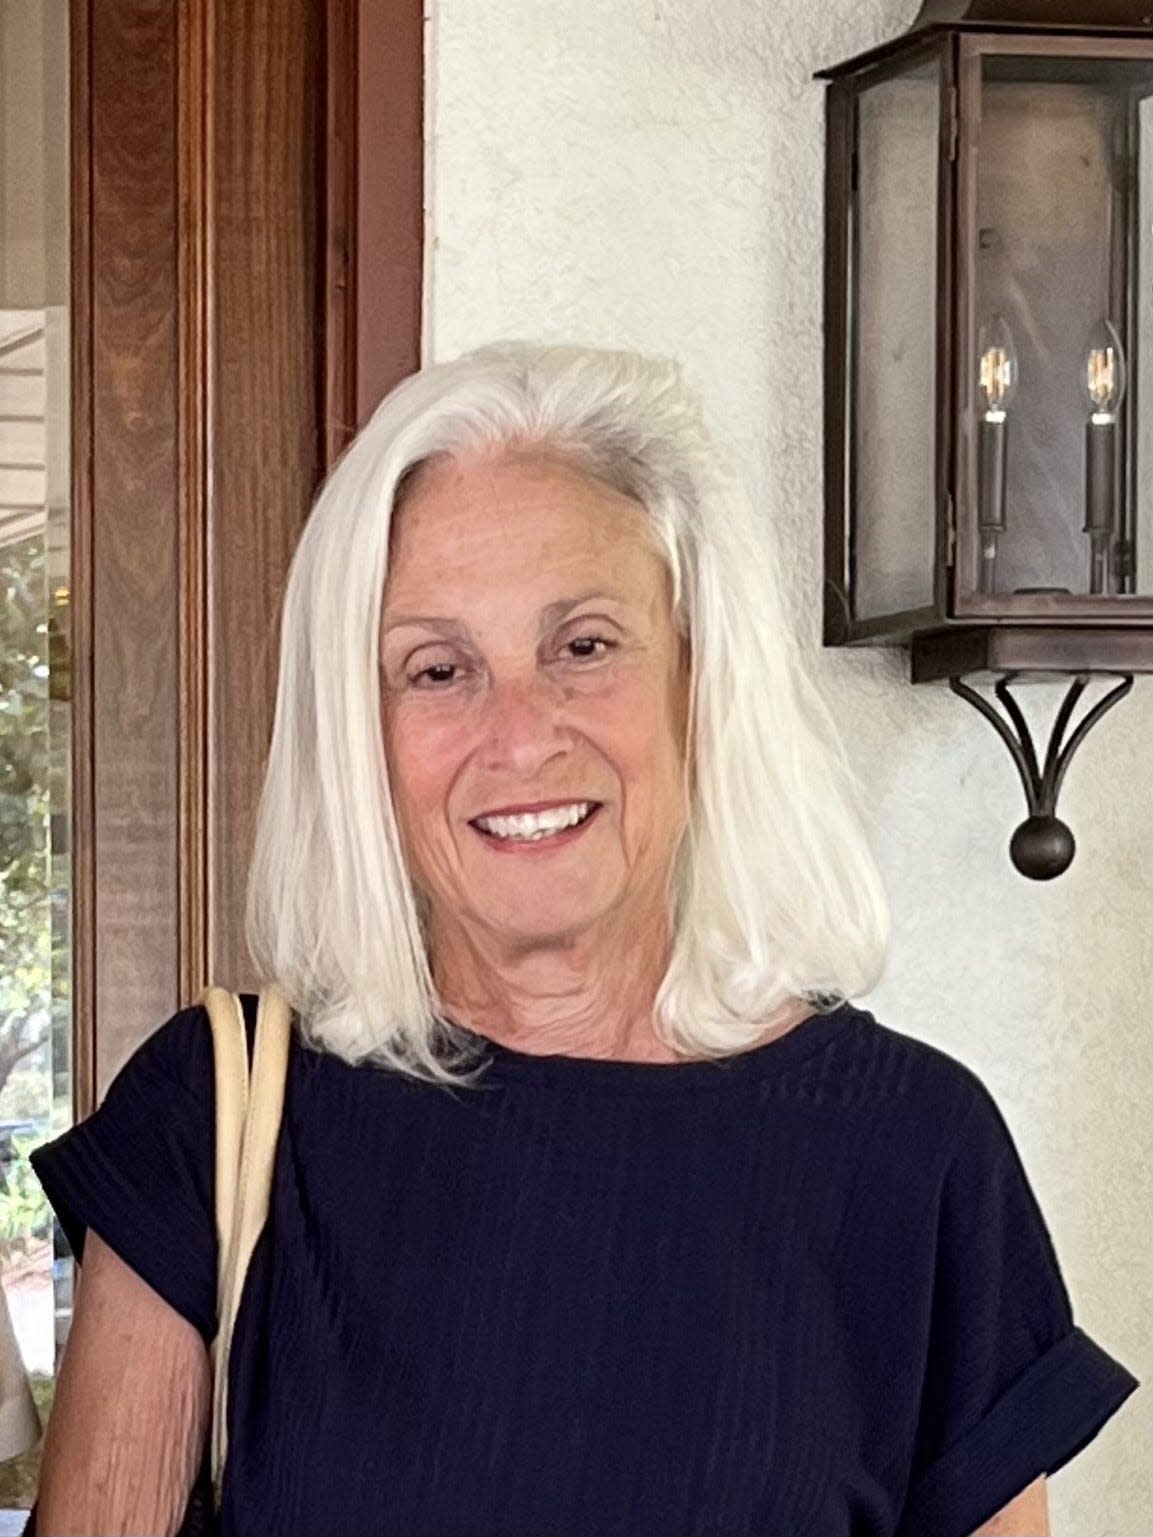 Joy Shapiro was treated for breast cancer in her 20s and then again in her 70s, making her a first-hand witness in the progress of treatment for the disease.